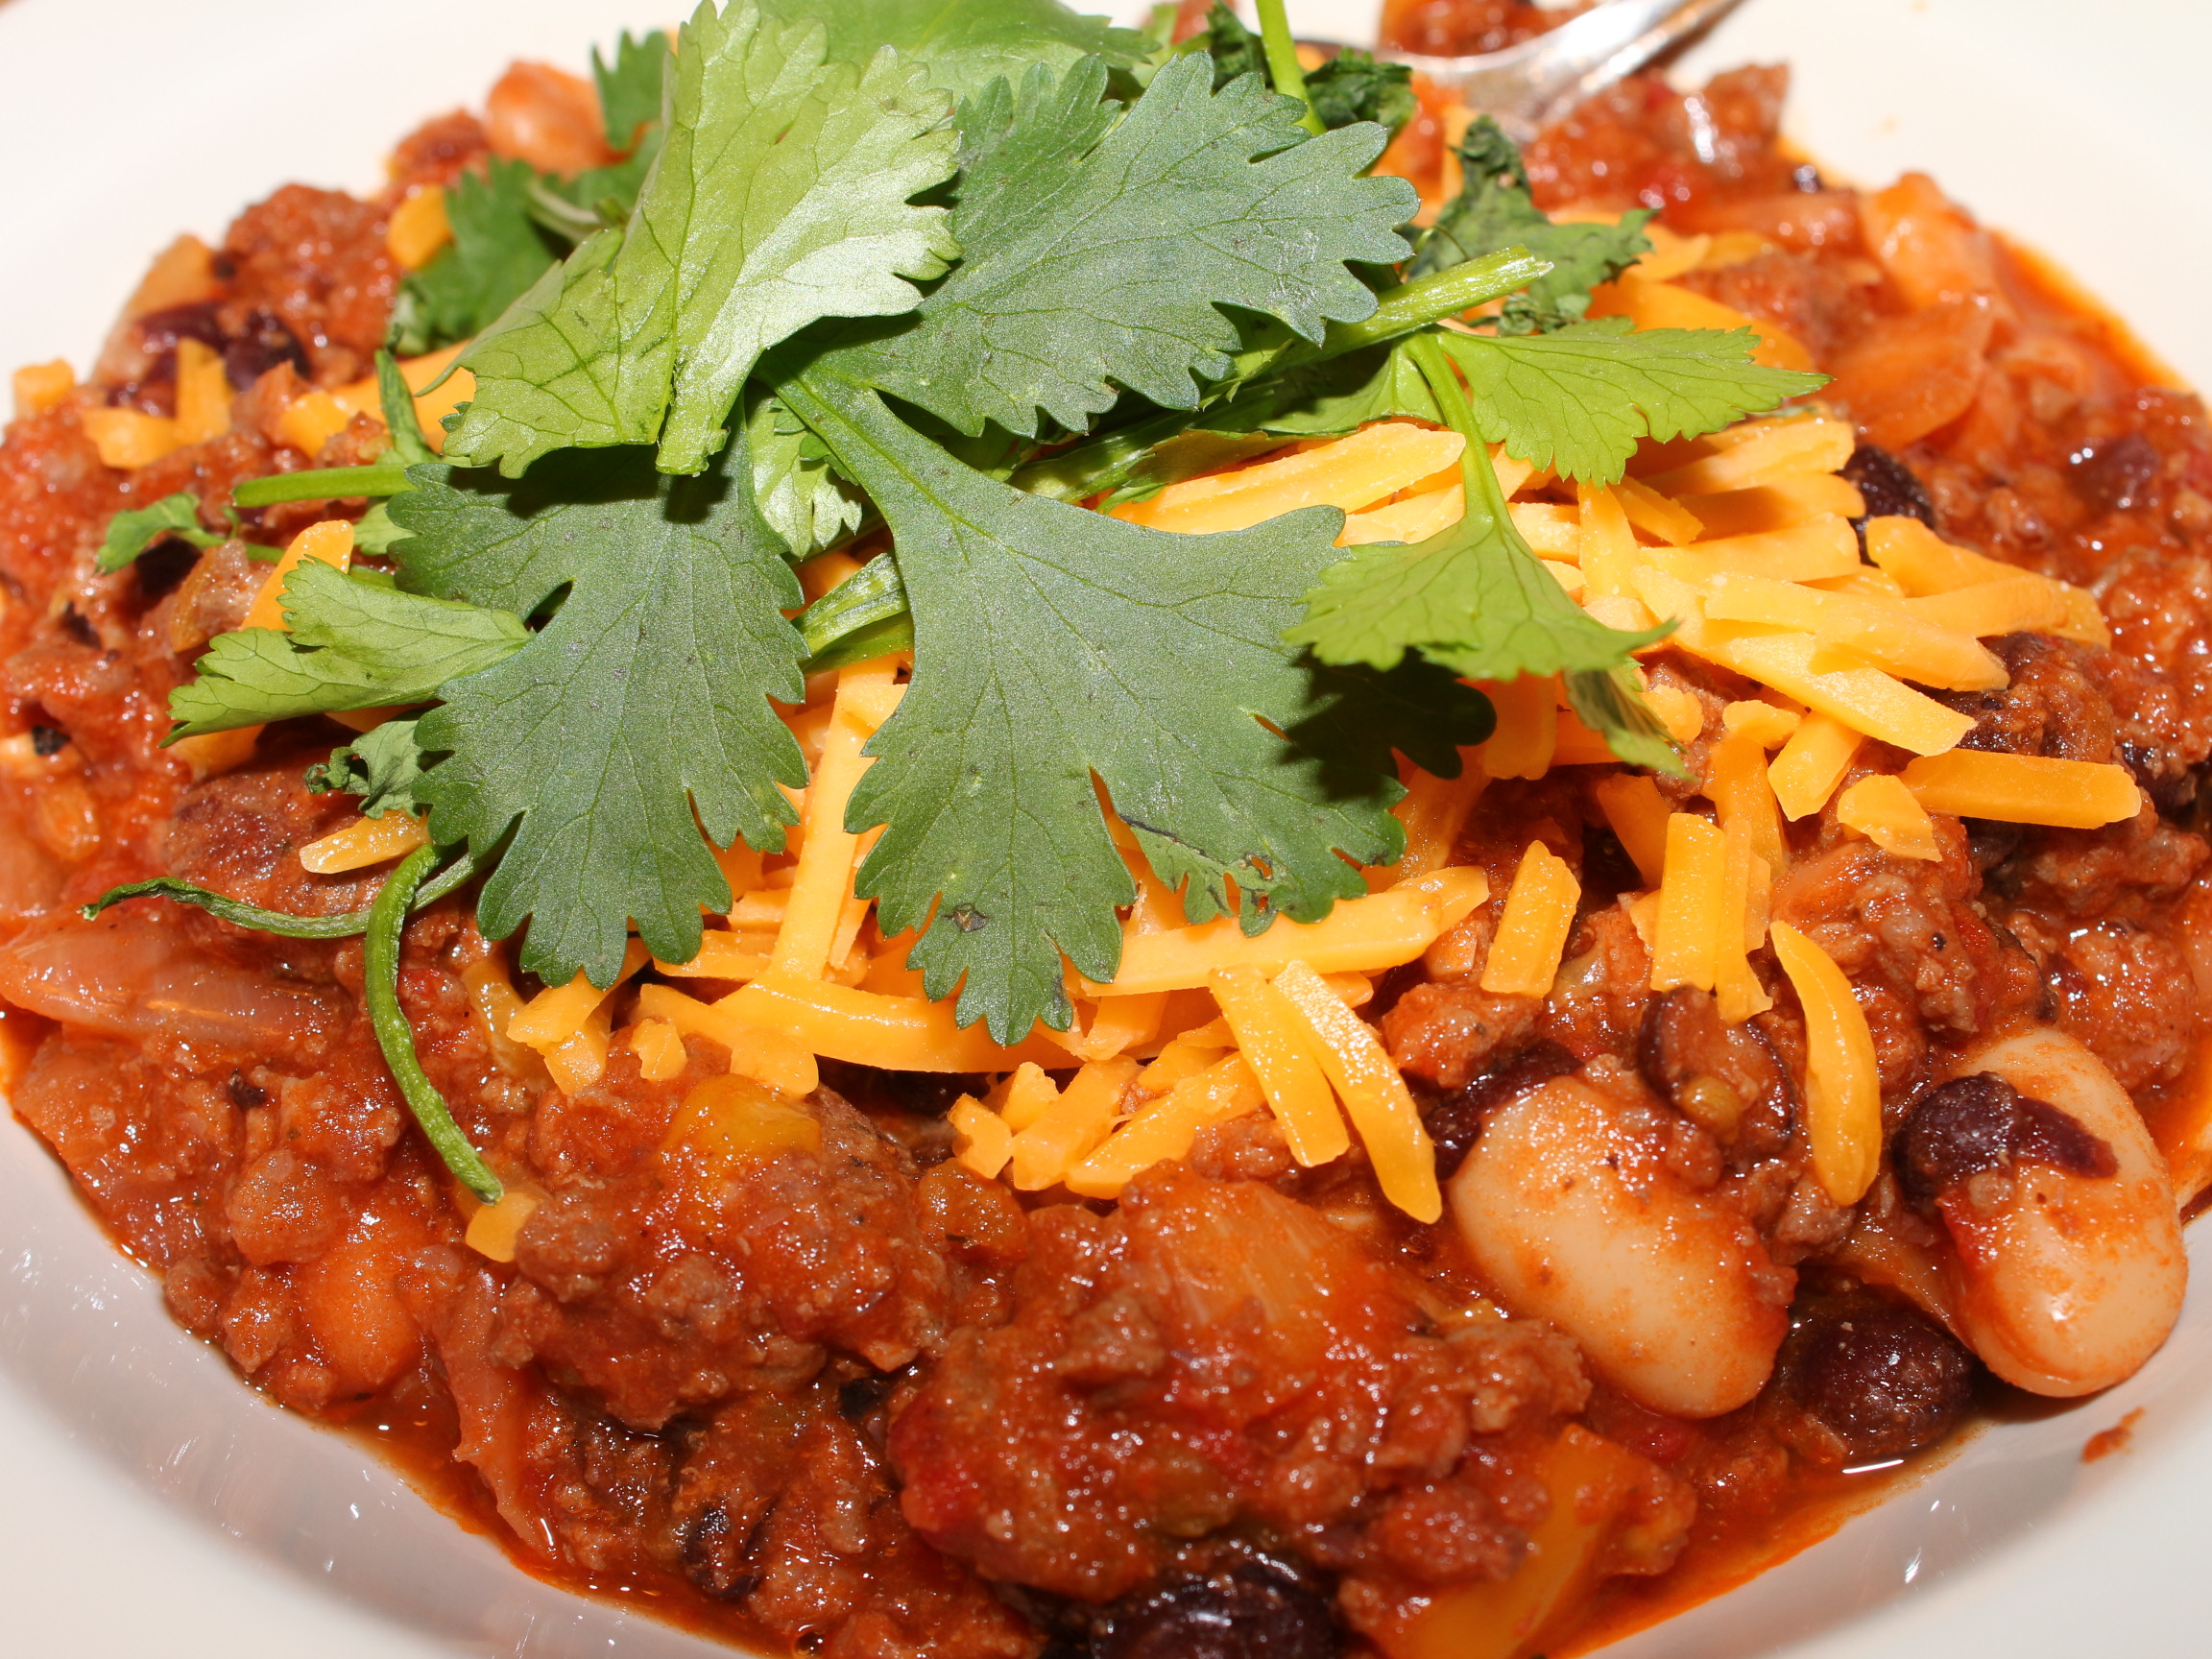 Slow Cooker Venison Chili for the Big Game